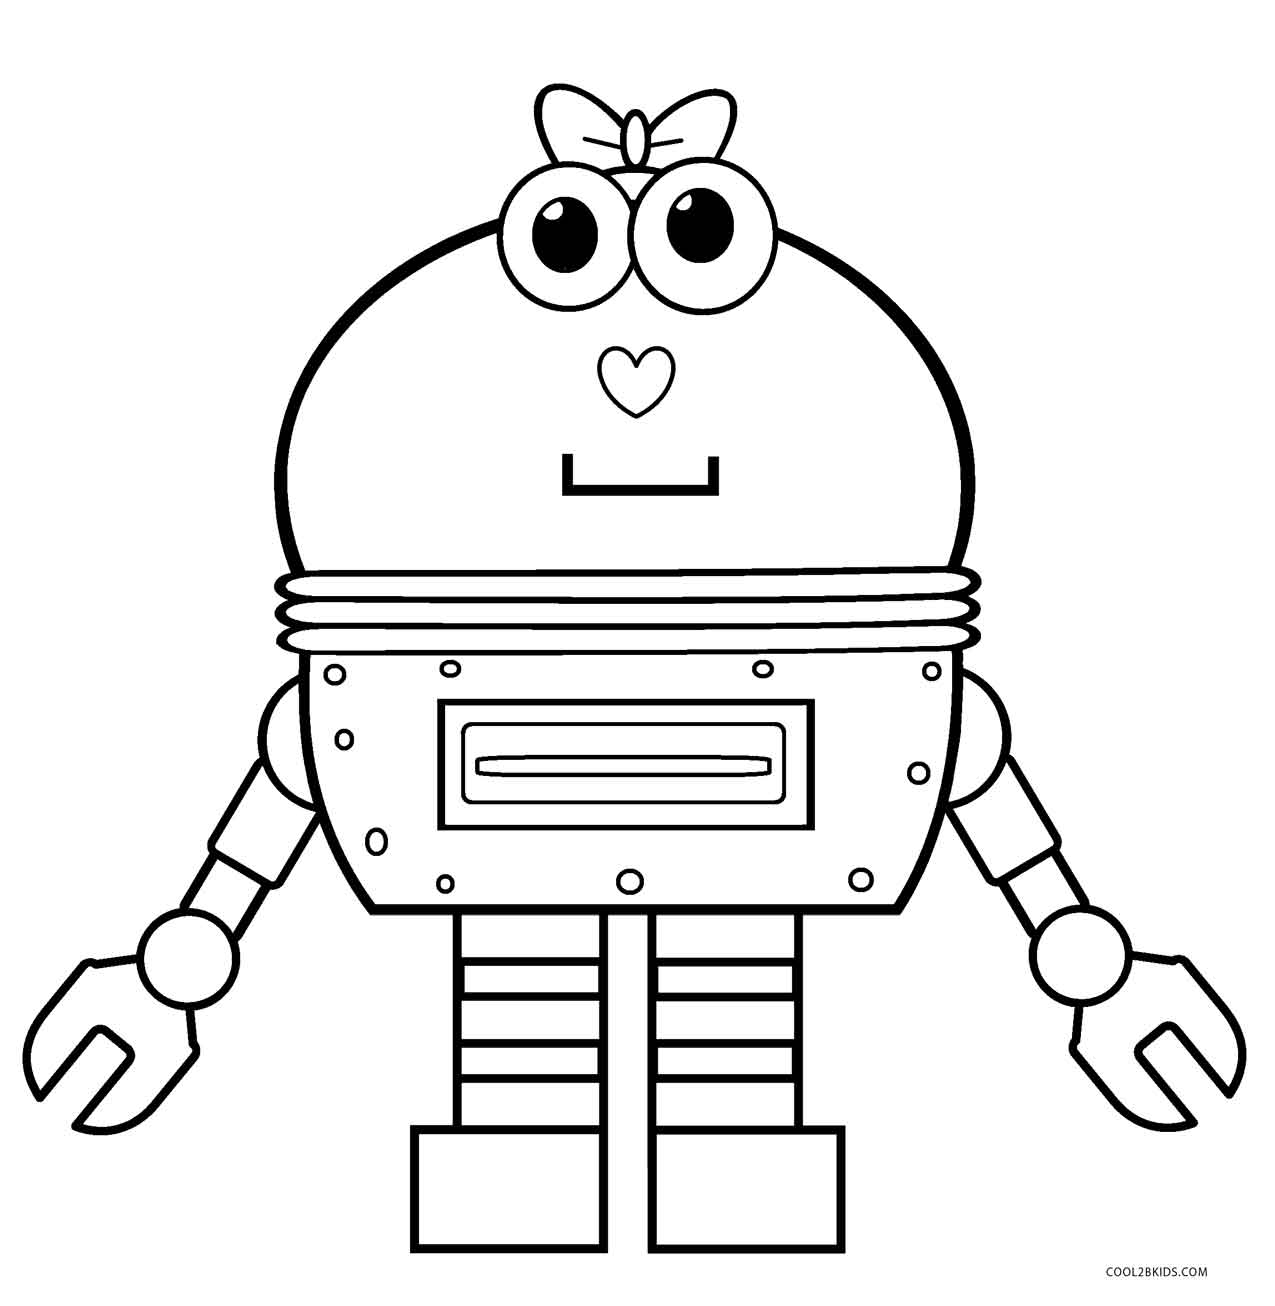 Free Printable Robot Coloring Pages For Kids | Cool2bKids